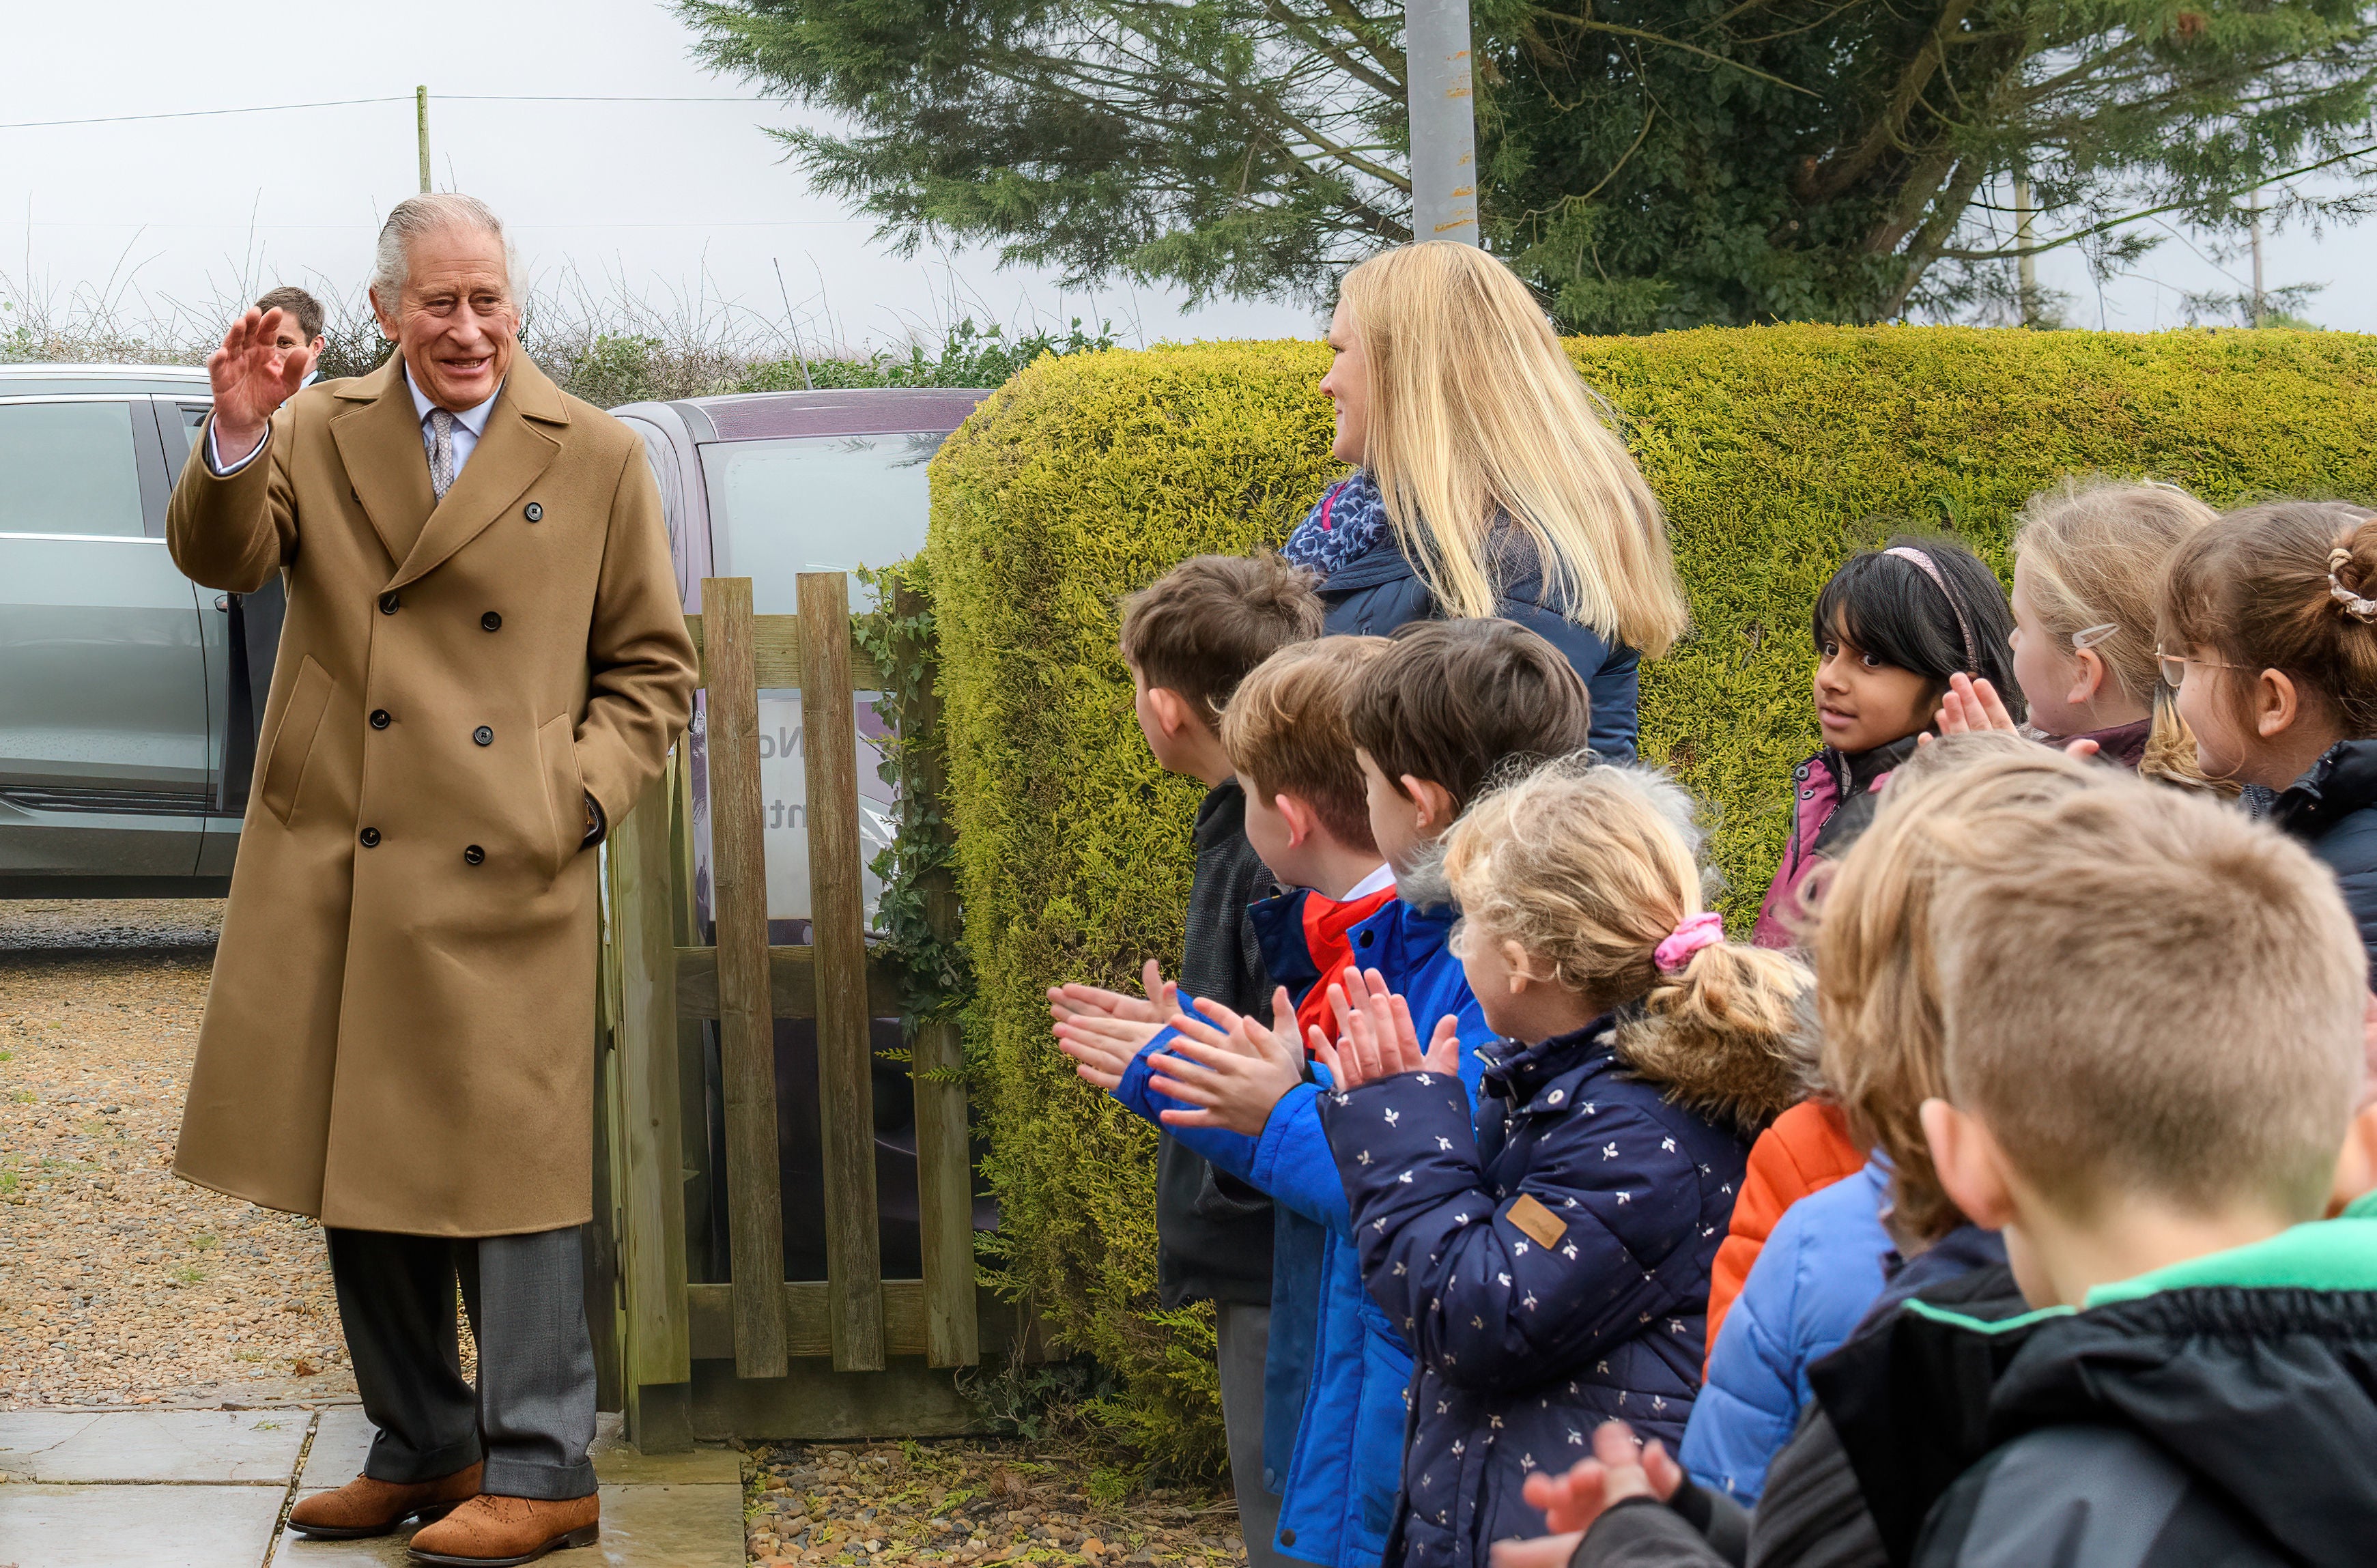 King Charles was pictured meeting school children in West Norfolk on Friday, 5 January